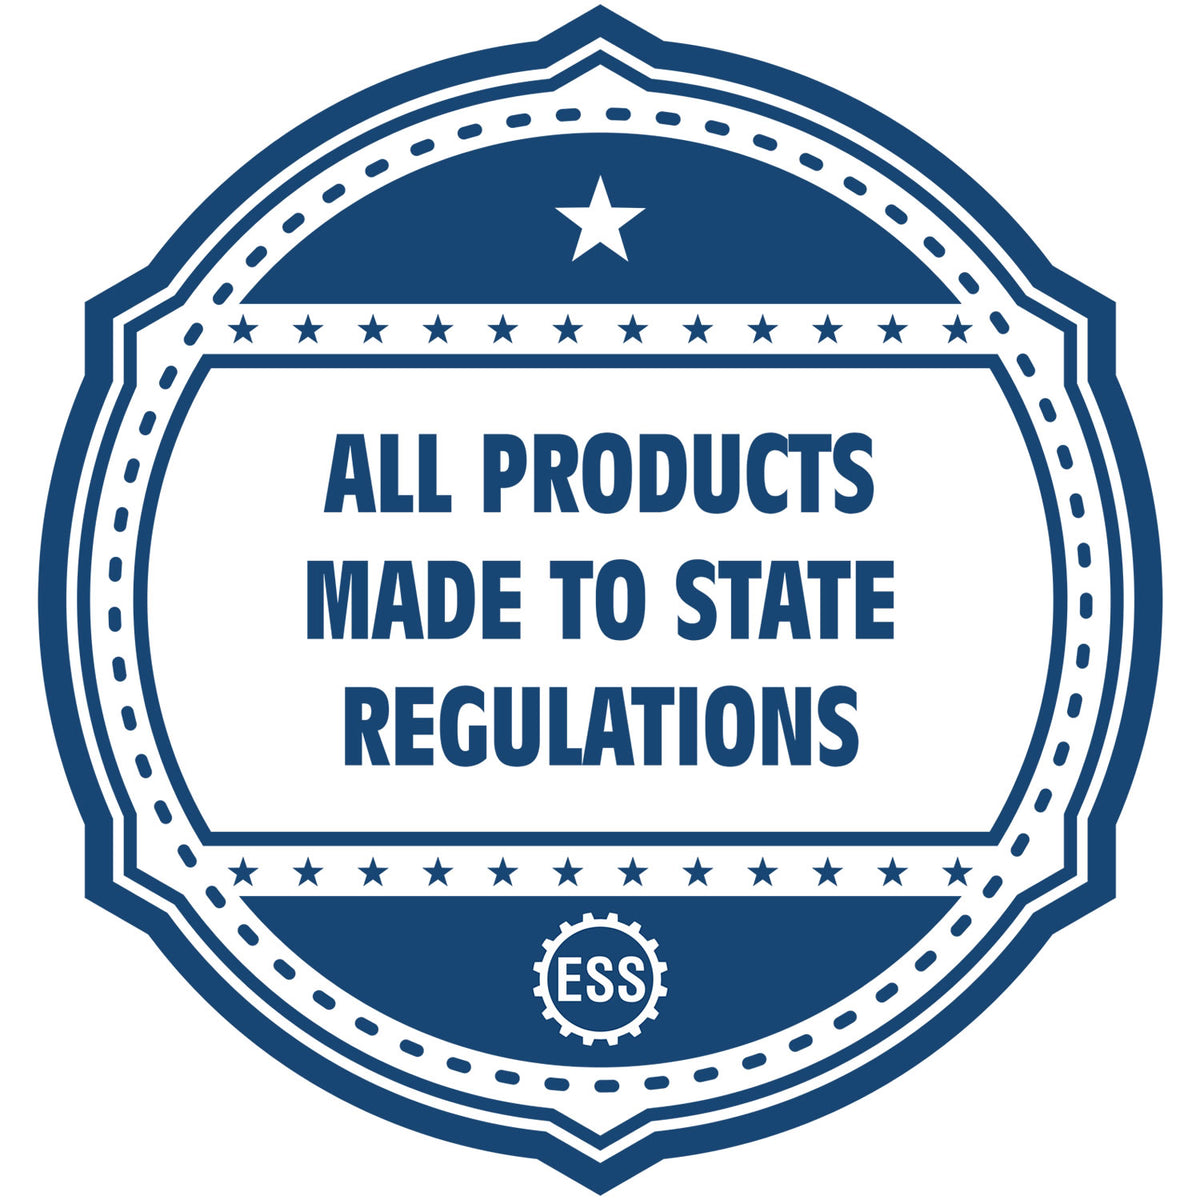 An icon or badge element for the Long Reach Alabama Land Surveyor Seal showing that this product is made in compliance with state regulations.